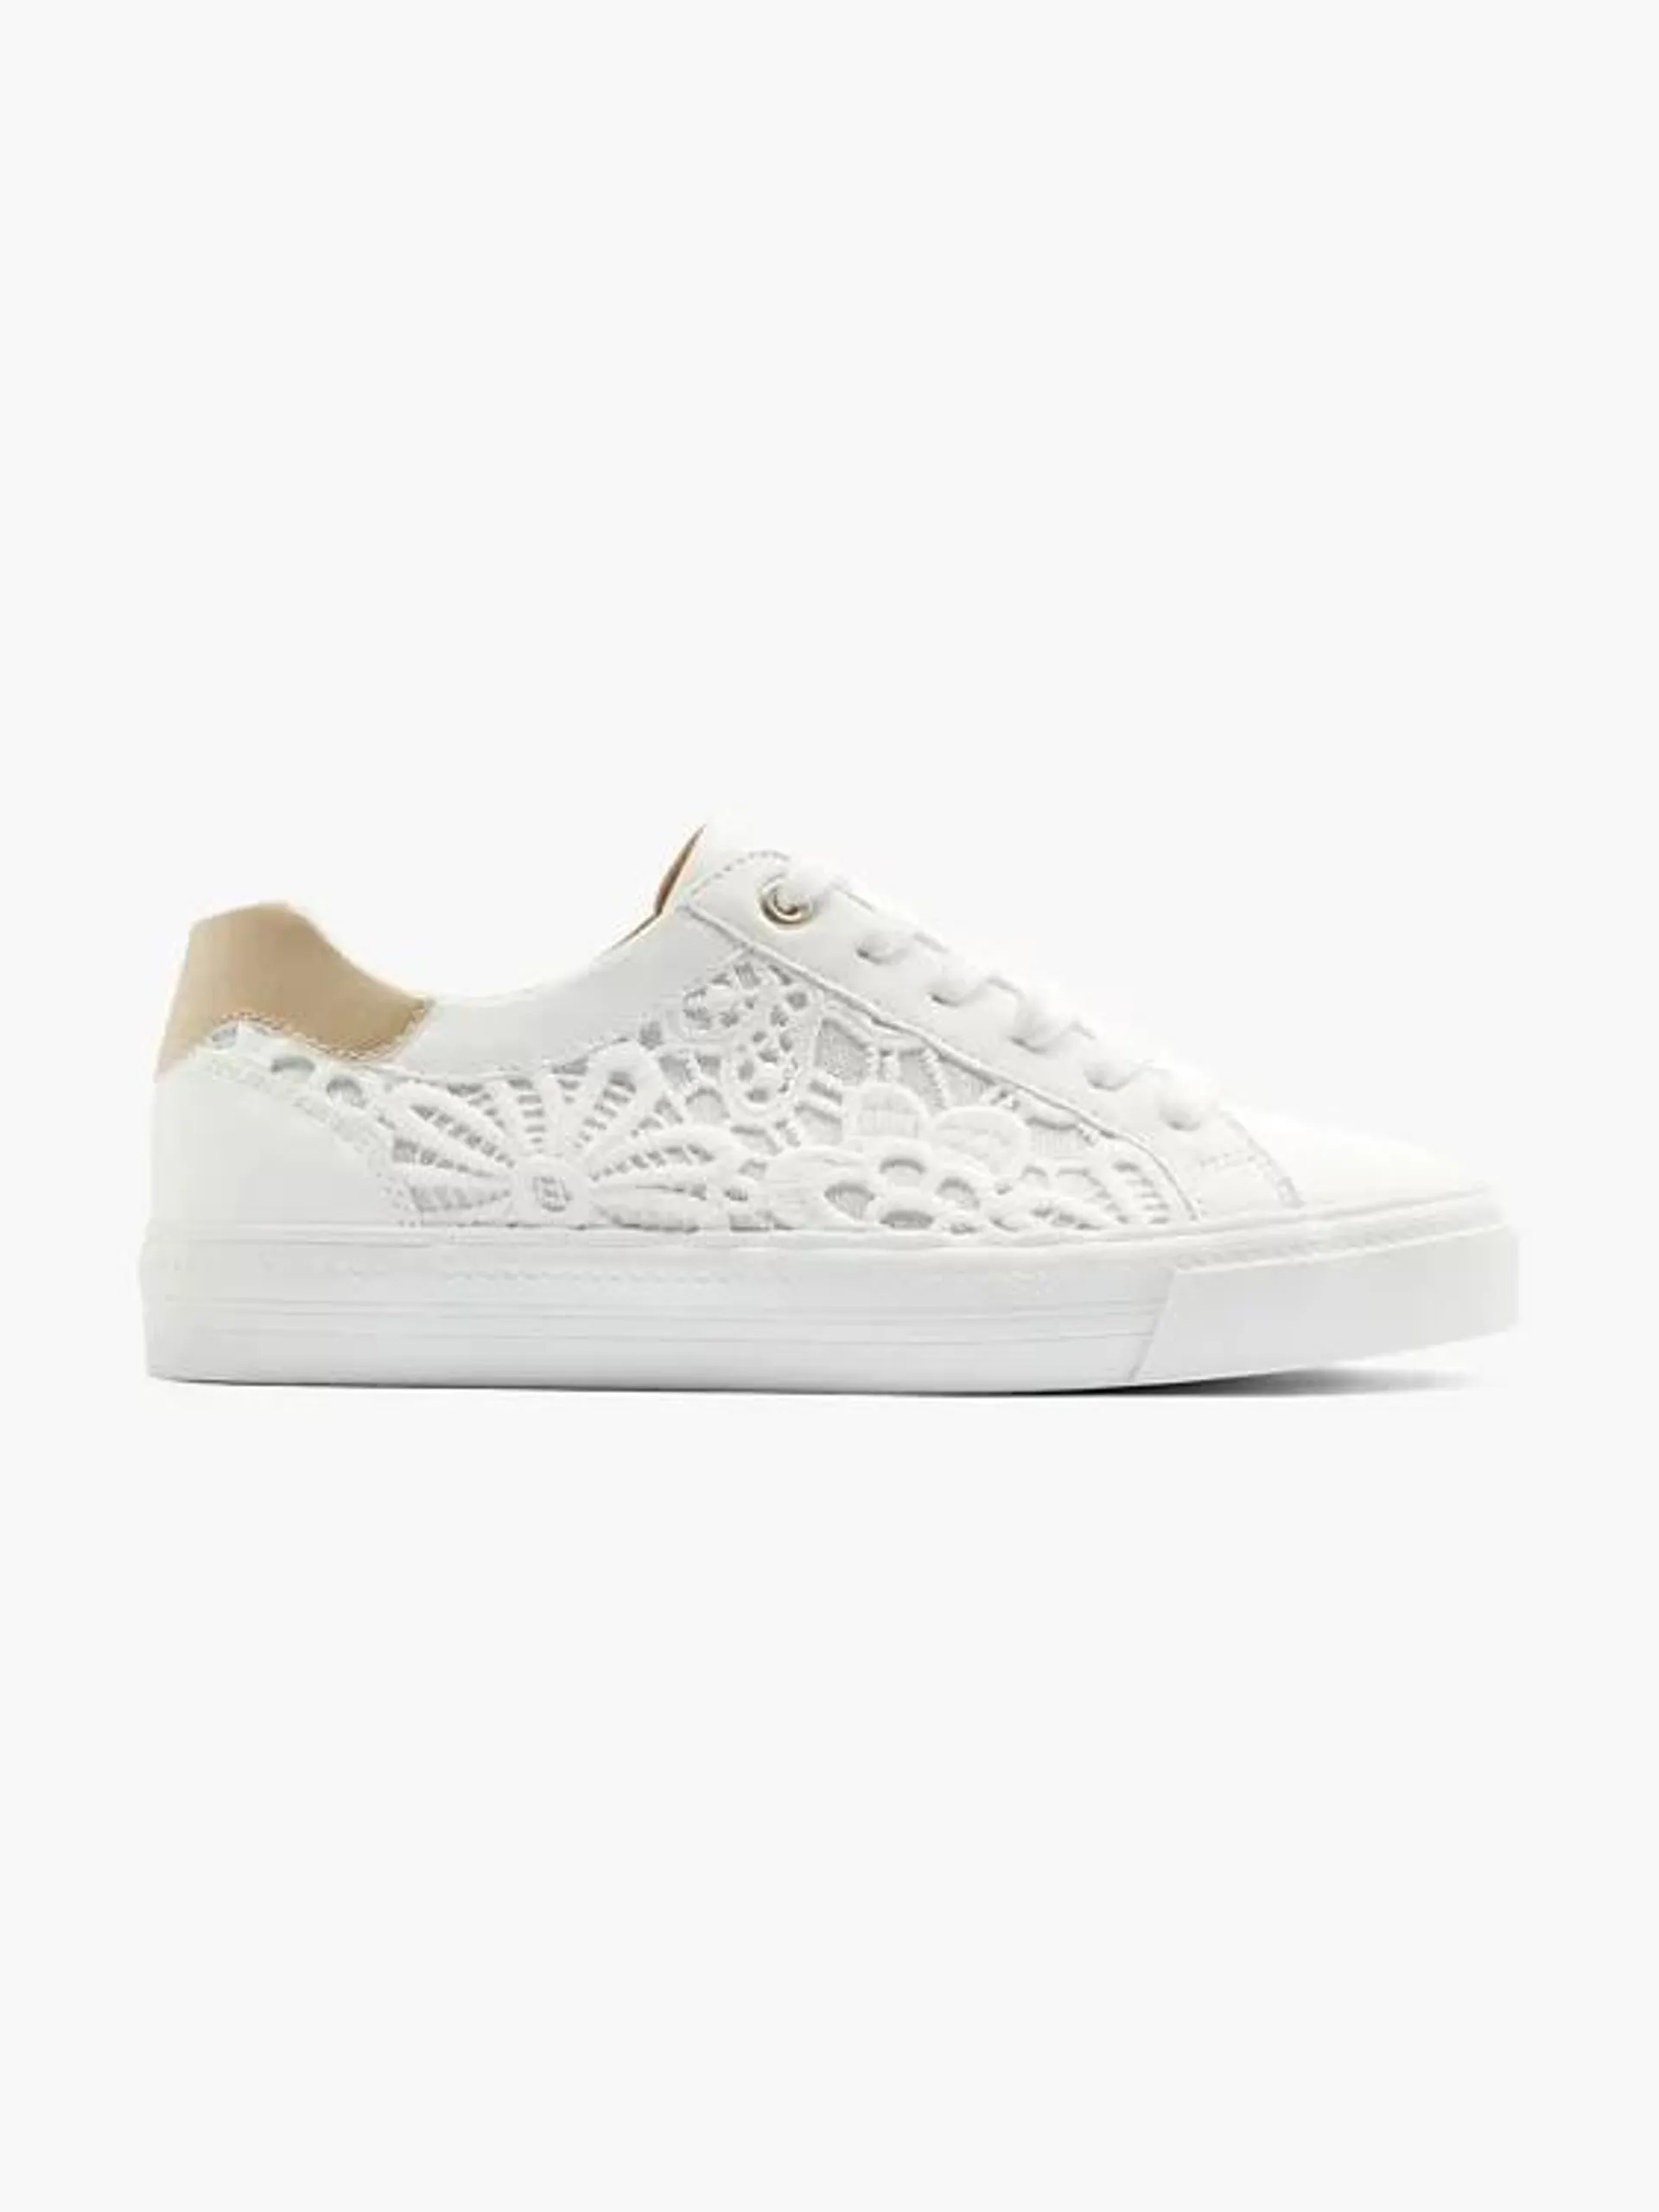 Lace Detail Womens Trainer